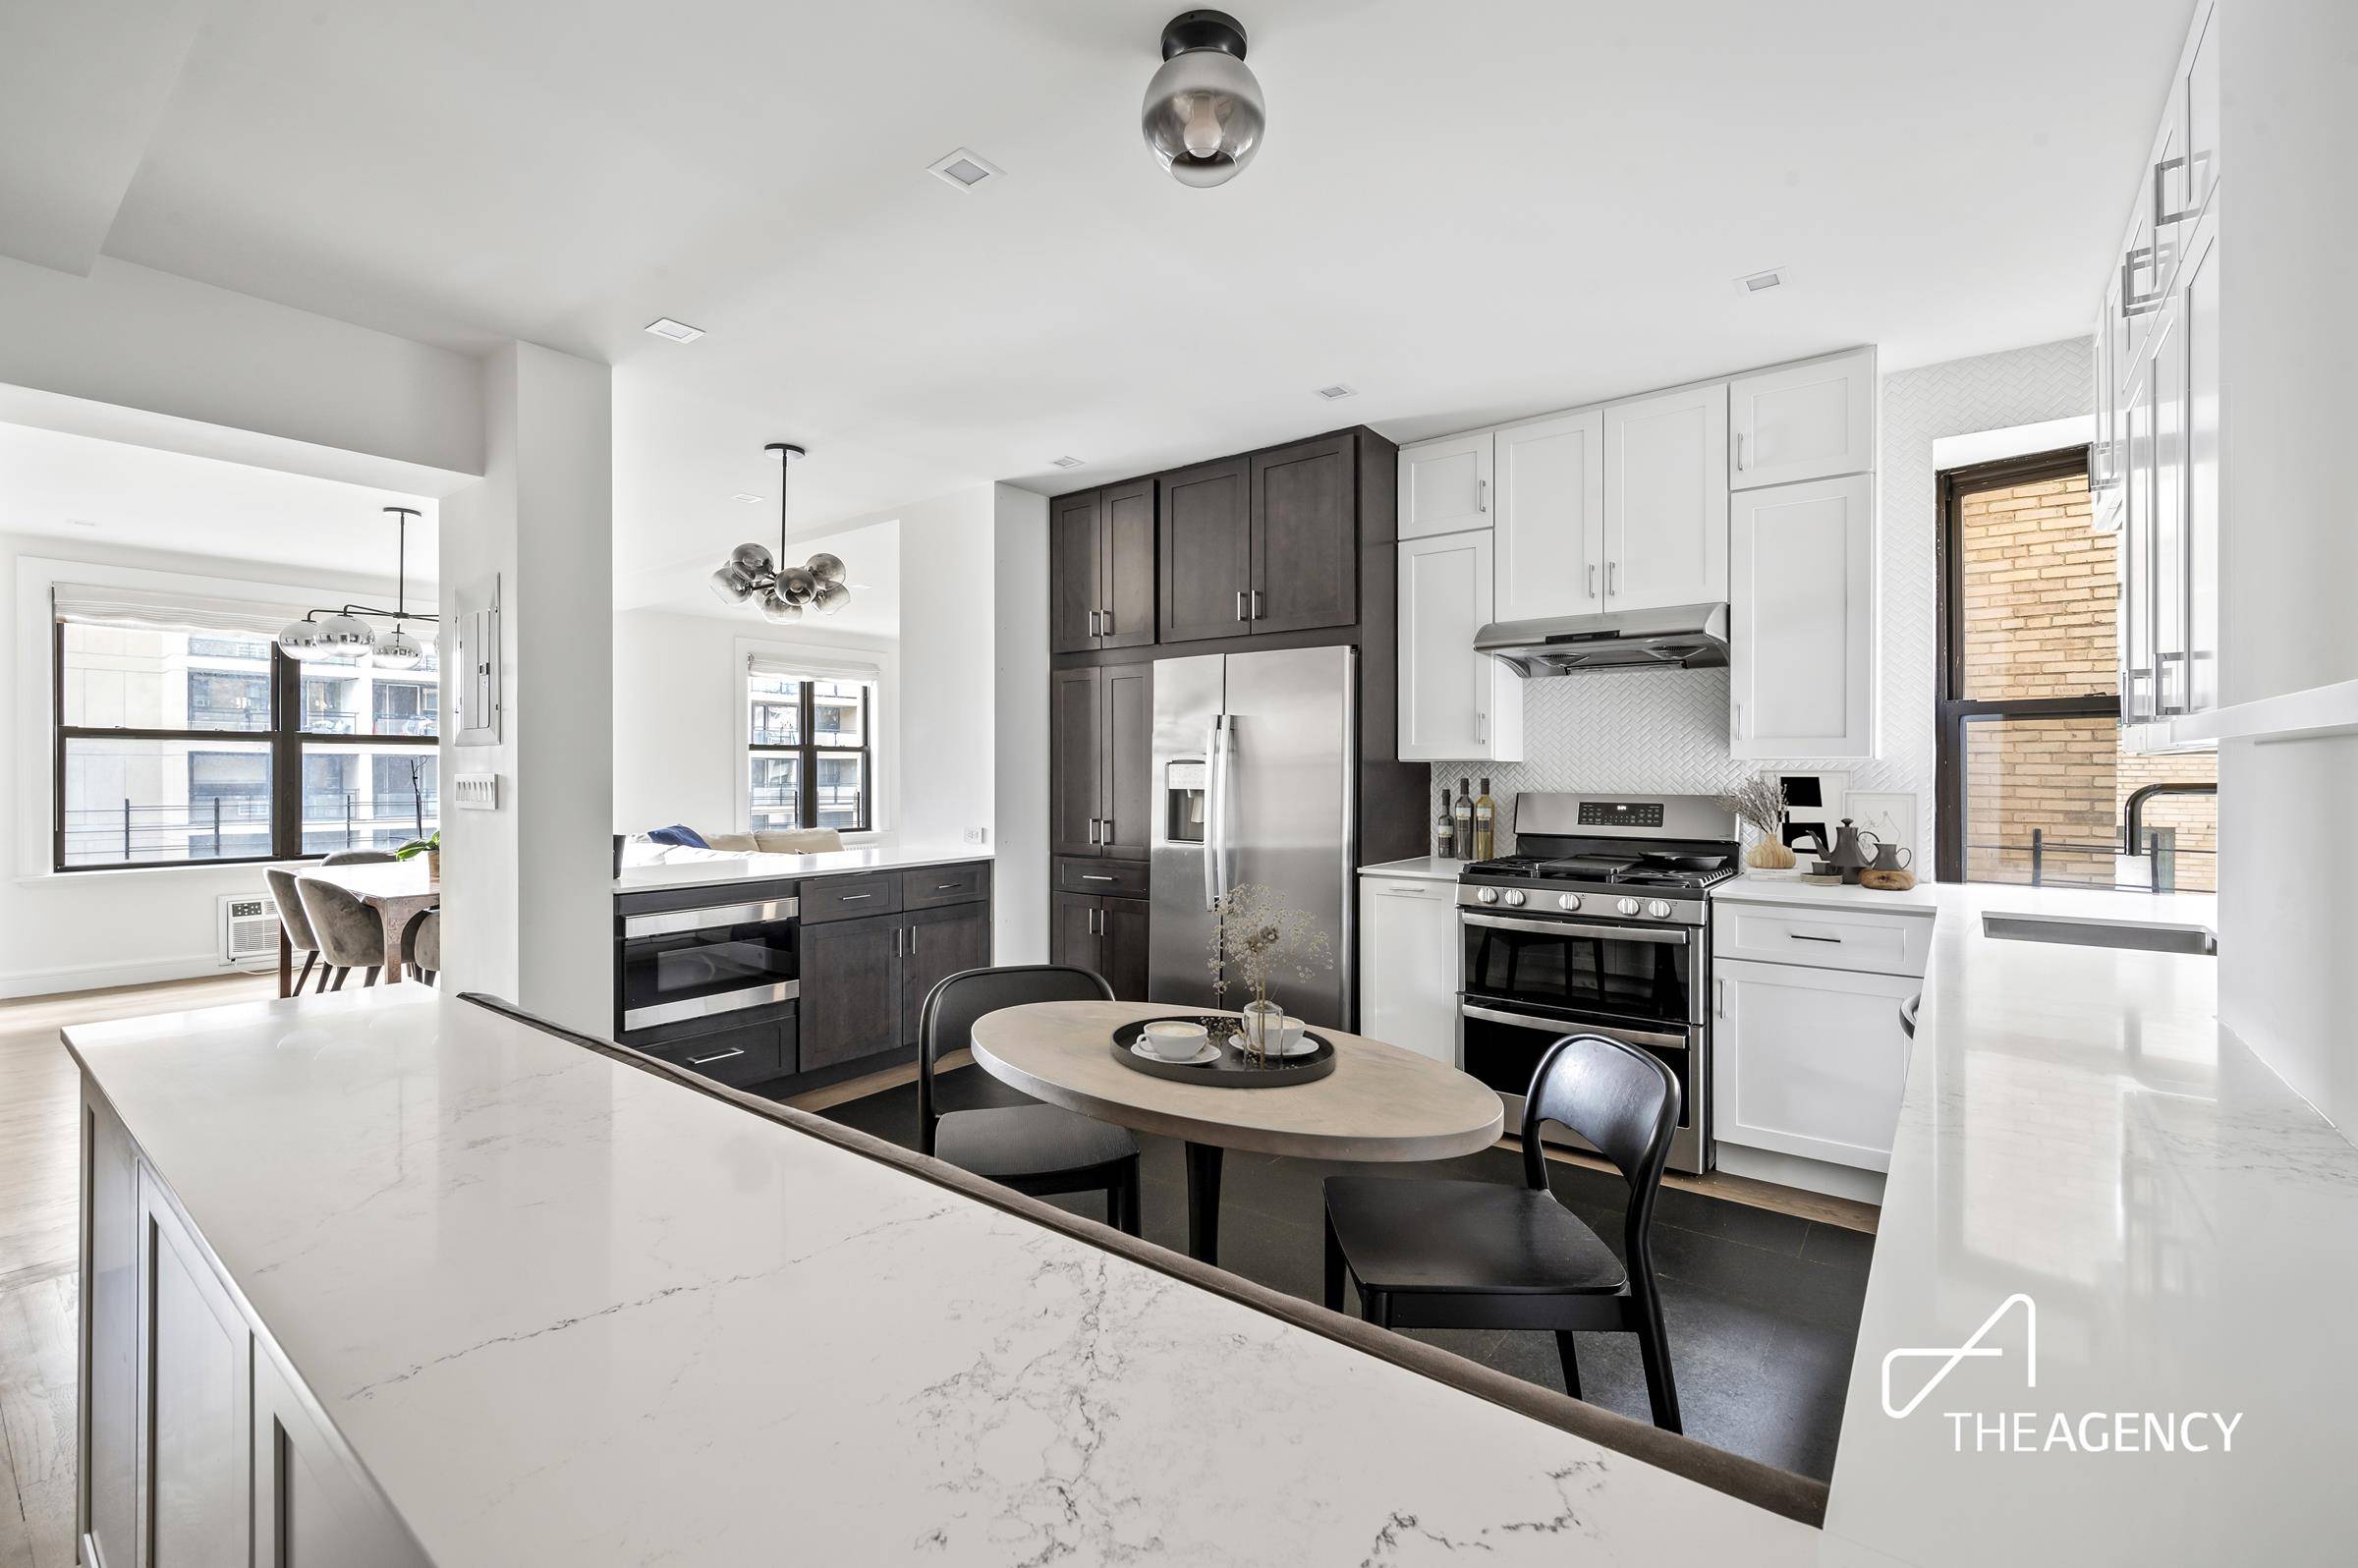 Welcome home to this meticulously renovated 4 bedroom, 2.